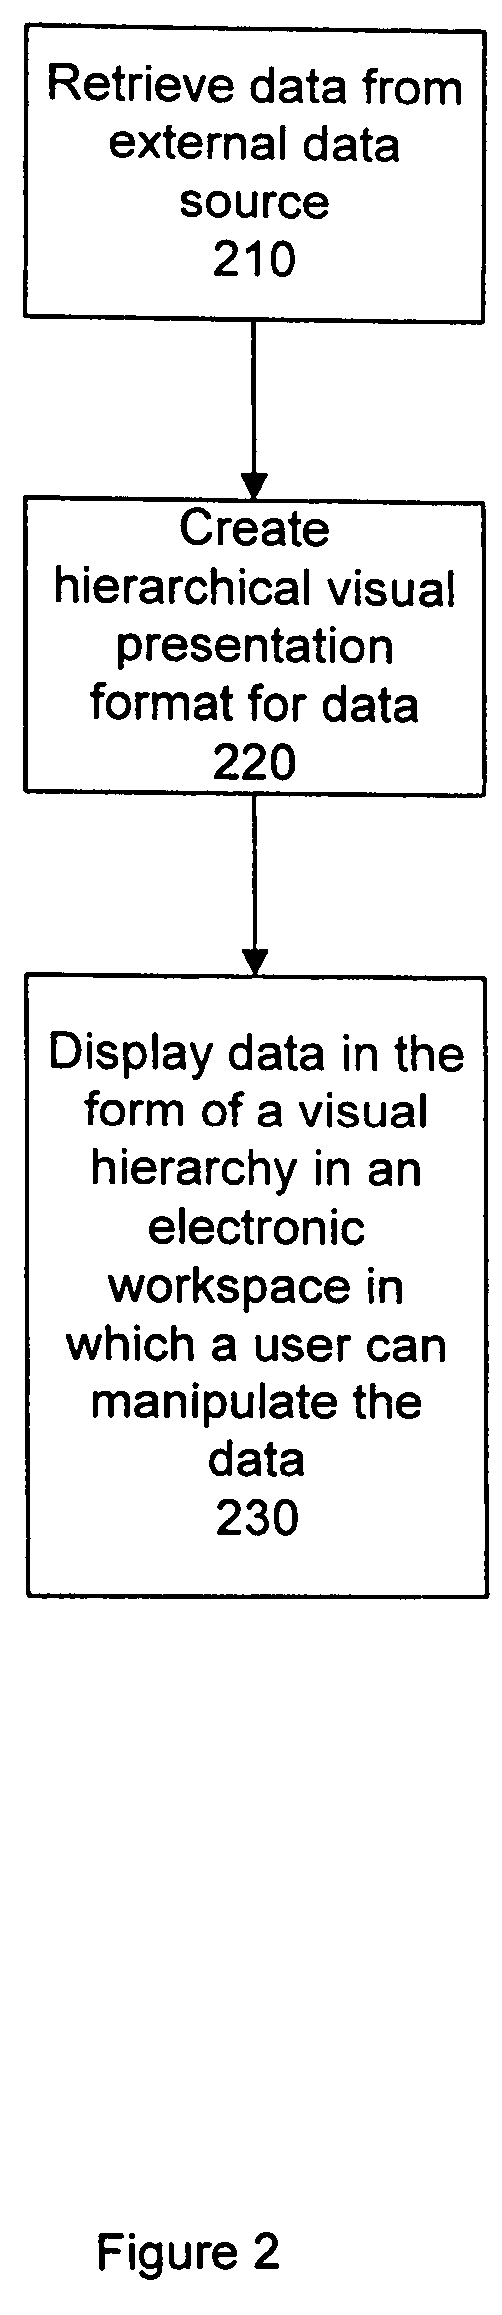 System and method for graphically illustrating external data source information in the form of a visual hierarchy in an electronic workspace